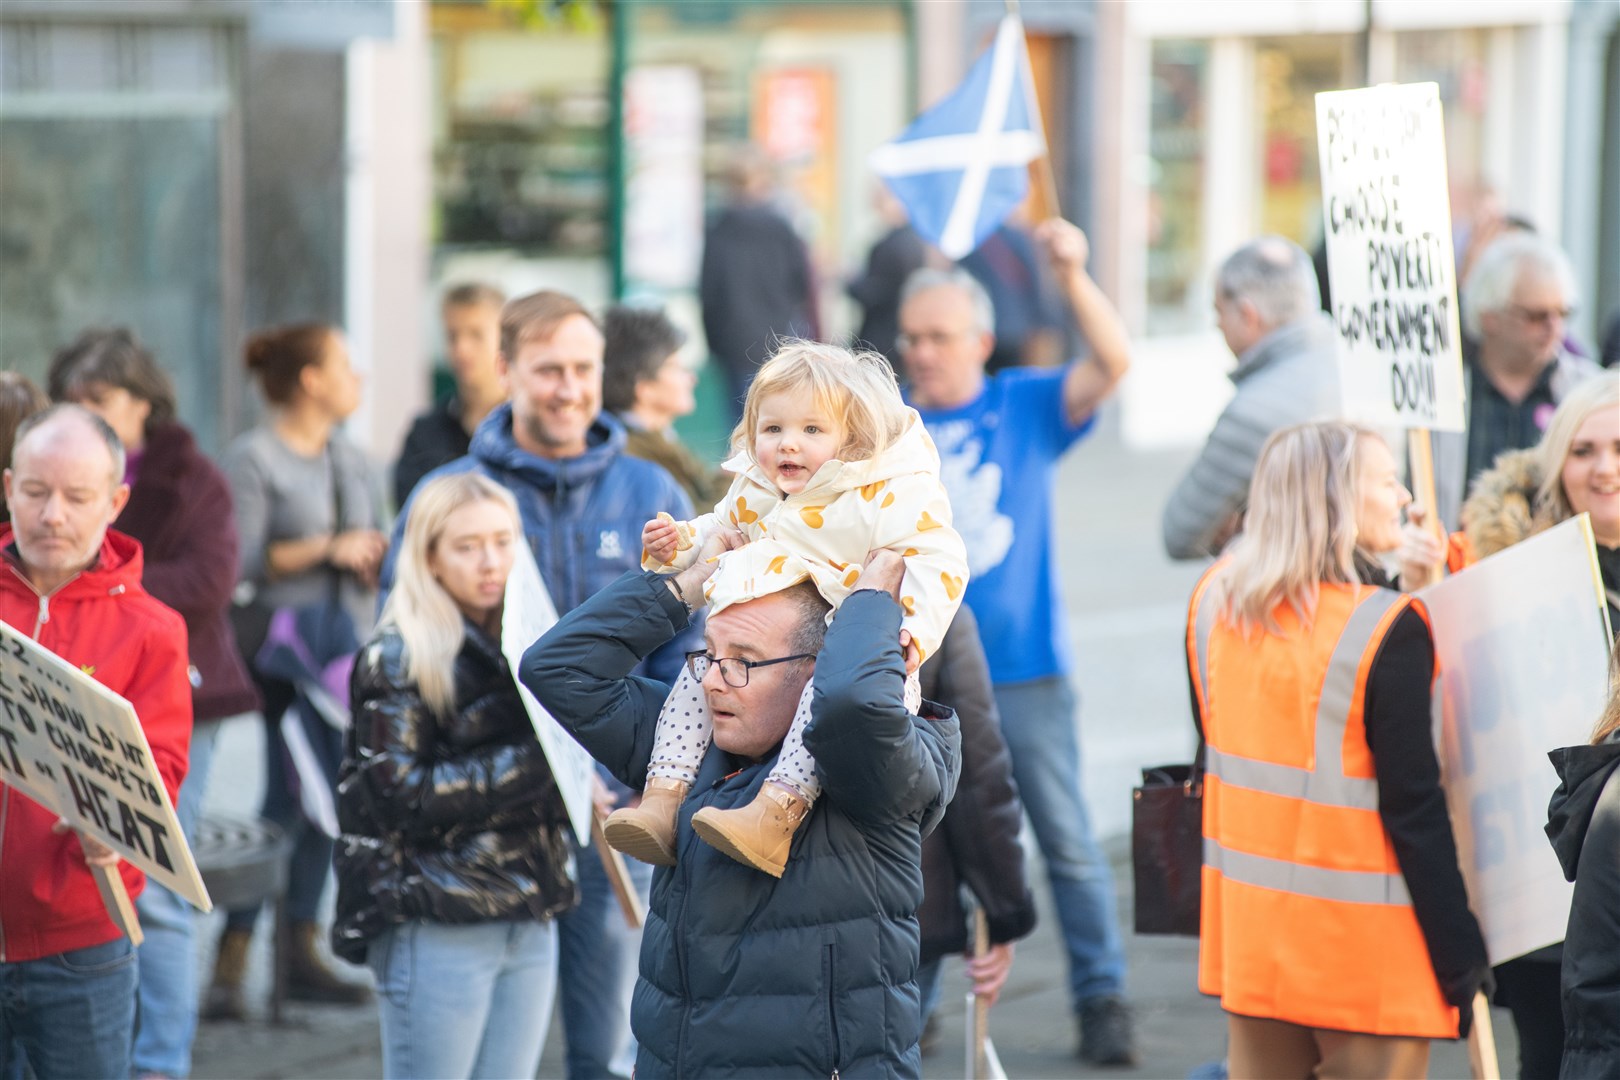 Chris Macpherson (centre) attended the protest with his daughter...Picture: Daniel Forsyth..